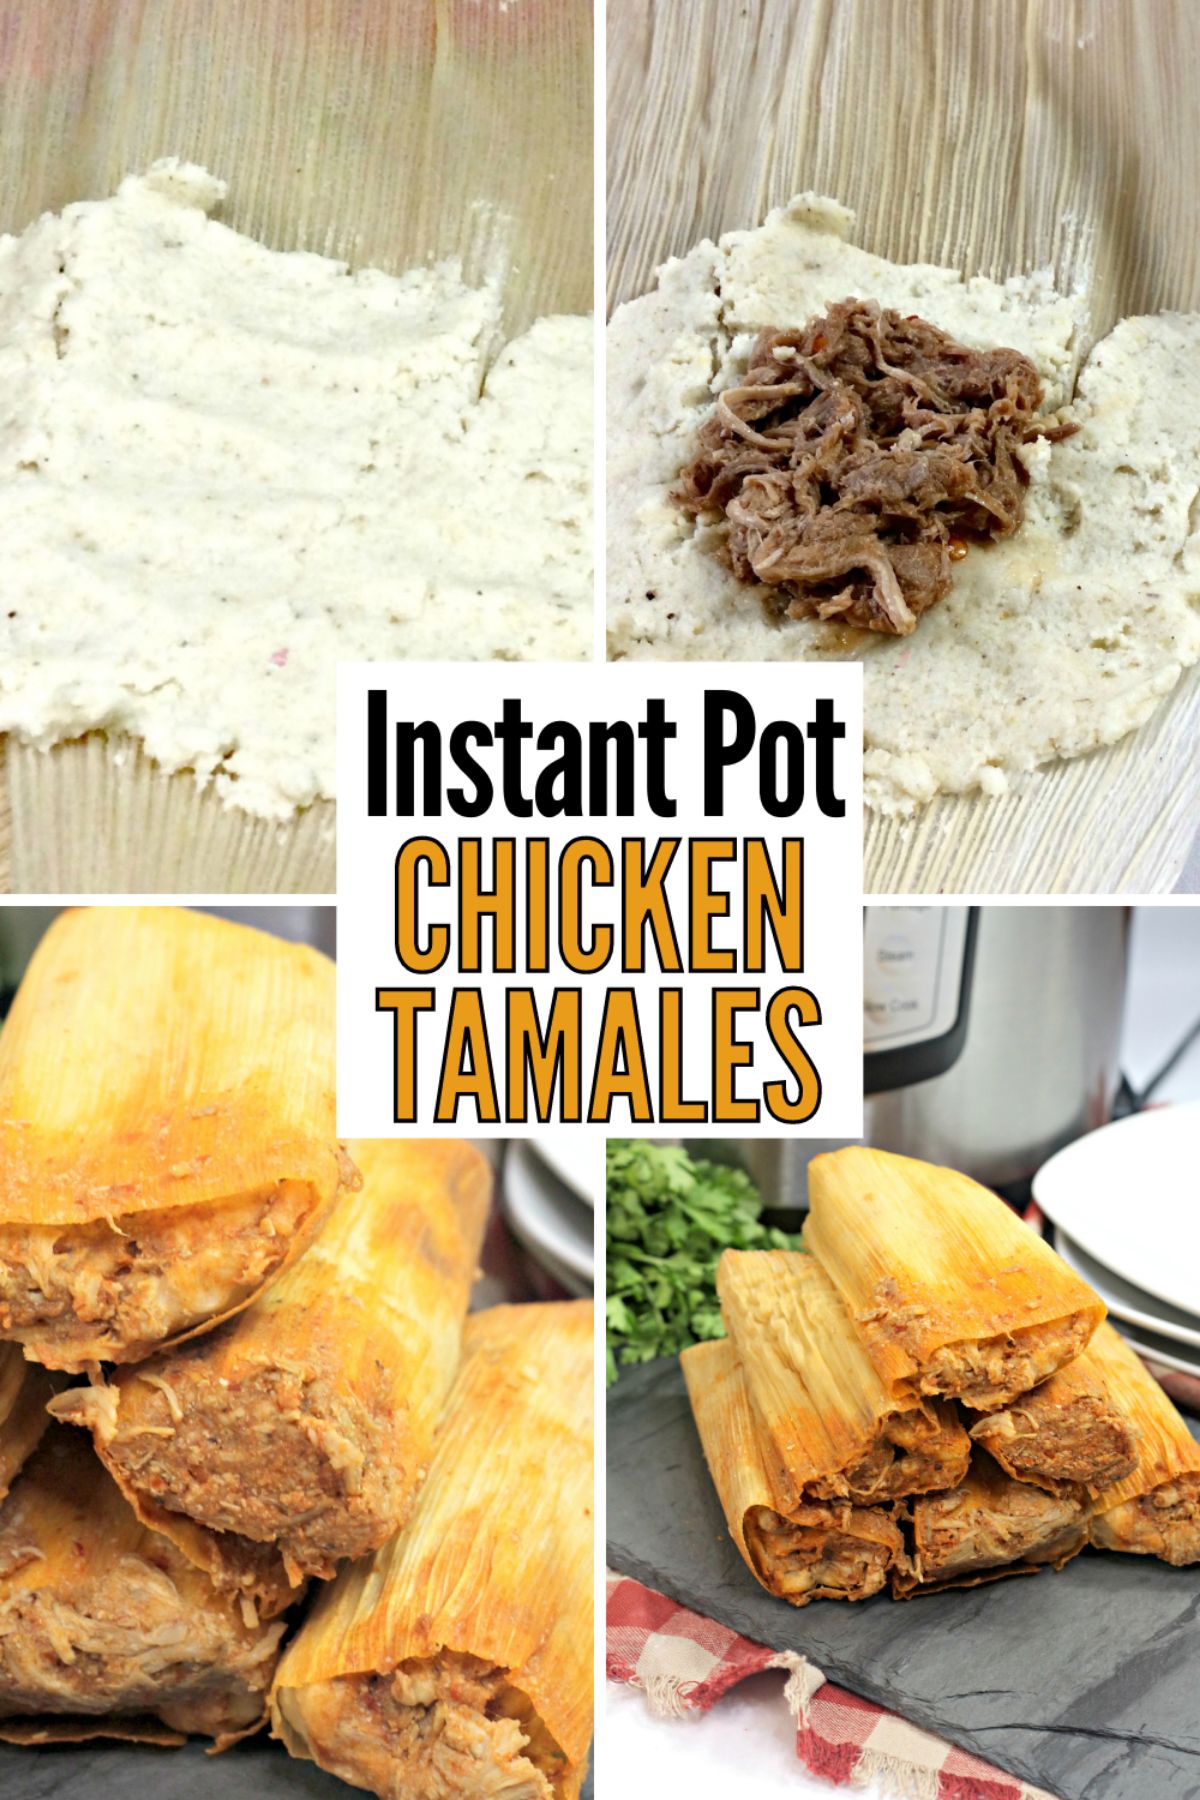 Instant Pot Tamales are a delicious Mexican dish for a great weeknight meal. The flavor of the spices and chicken is a crowd-pleaser. #instantpot #pressurecooker #tamales #instantpottamales #mexicanfood via @wondermomwannab